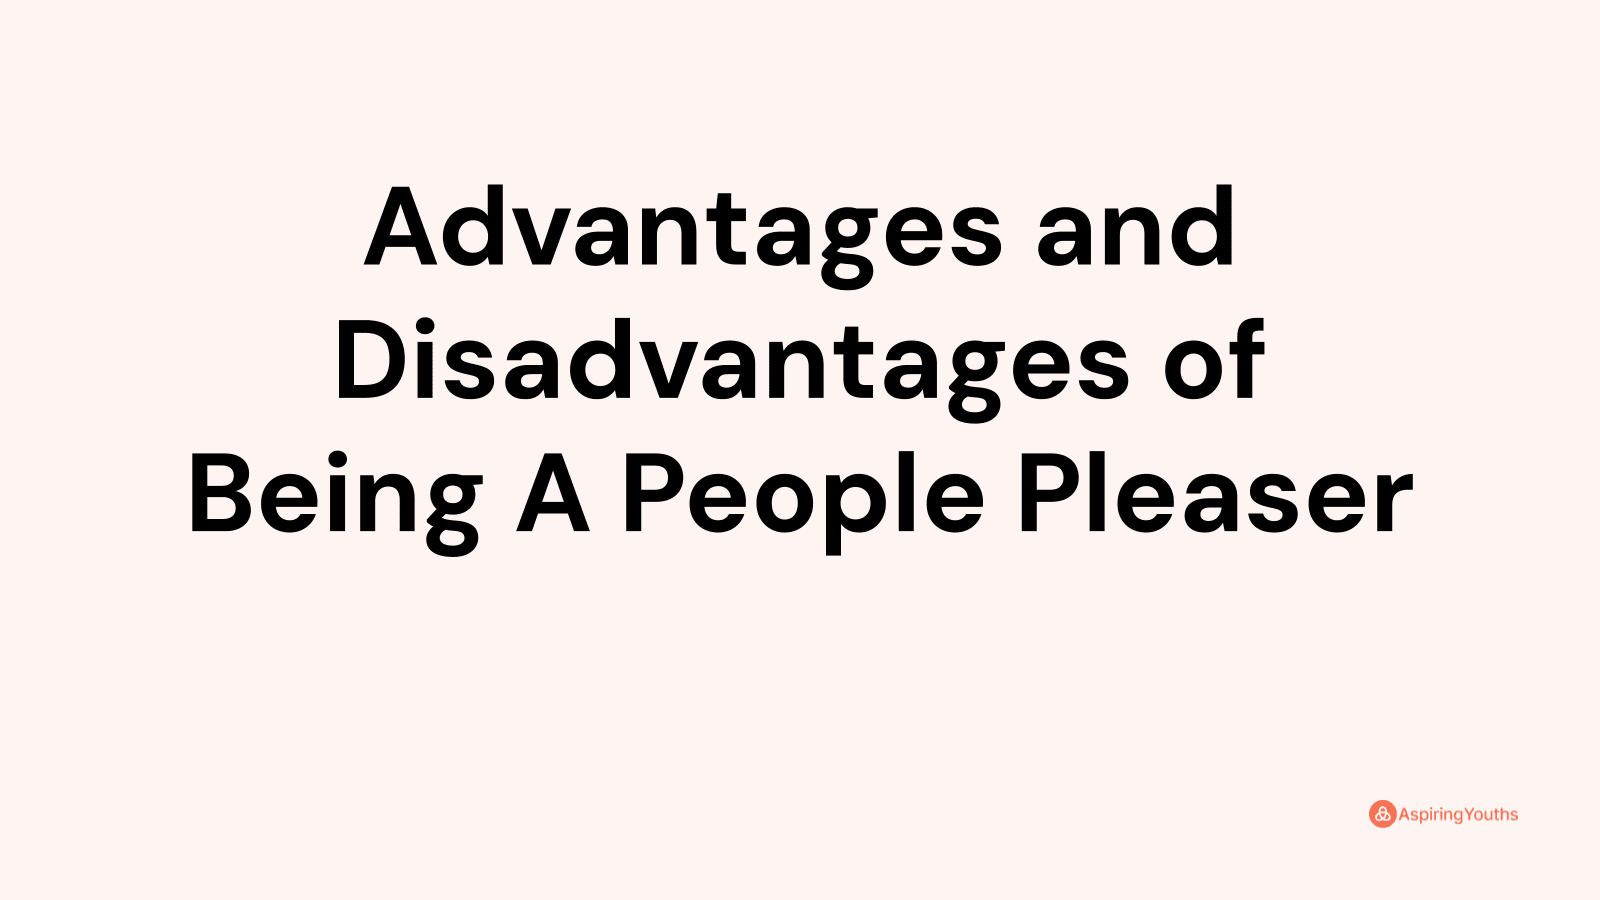 Advantages and disadvantages of Being A People Pleaser